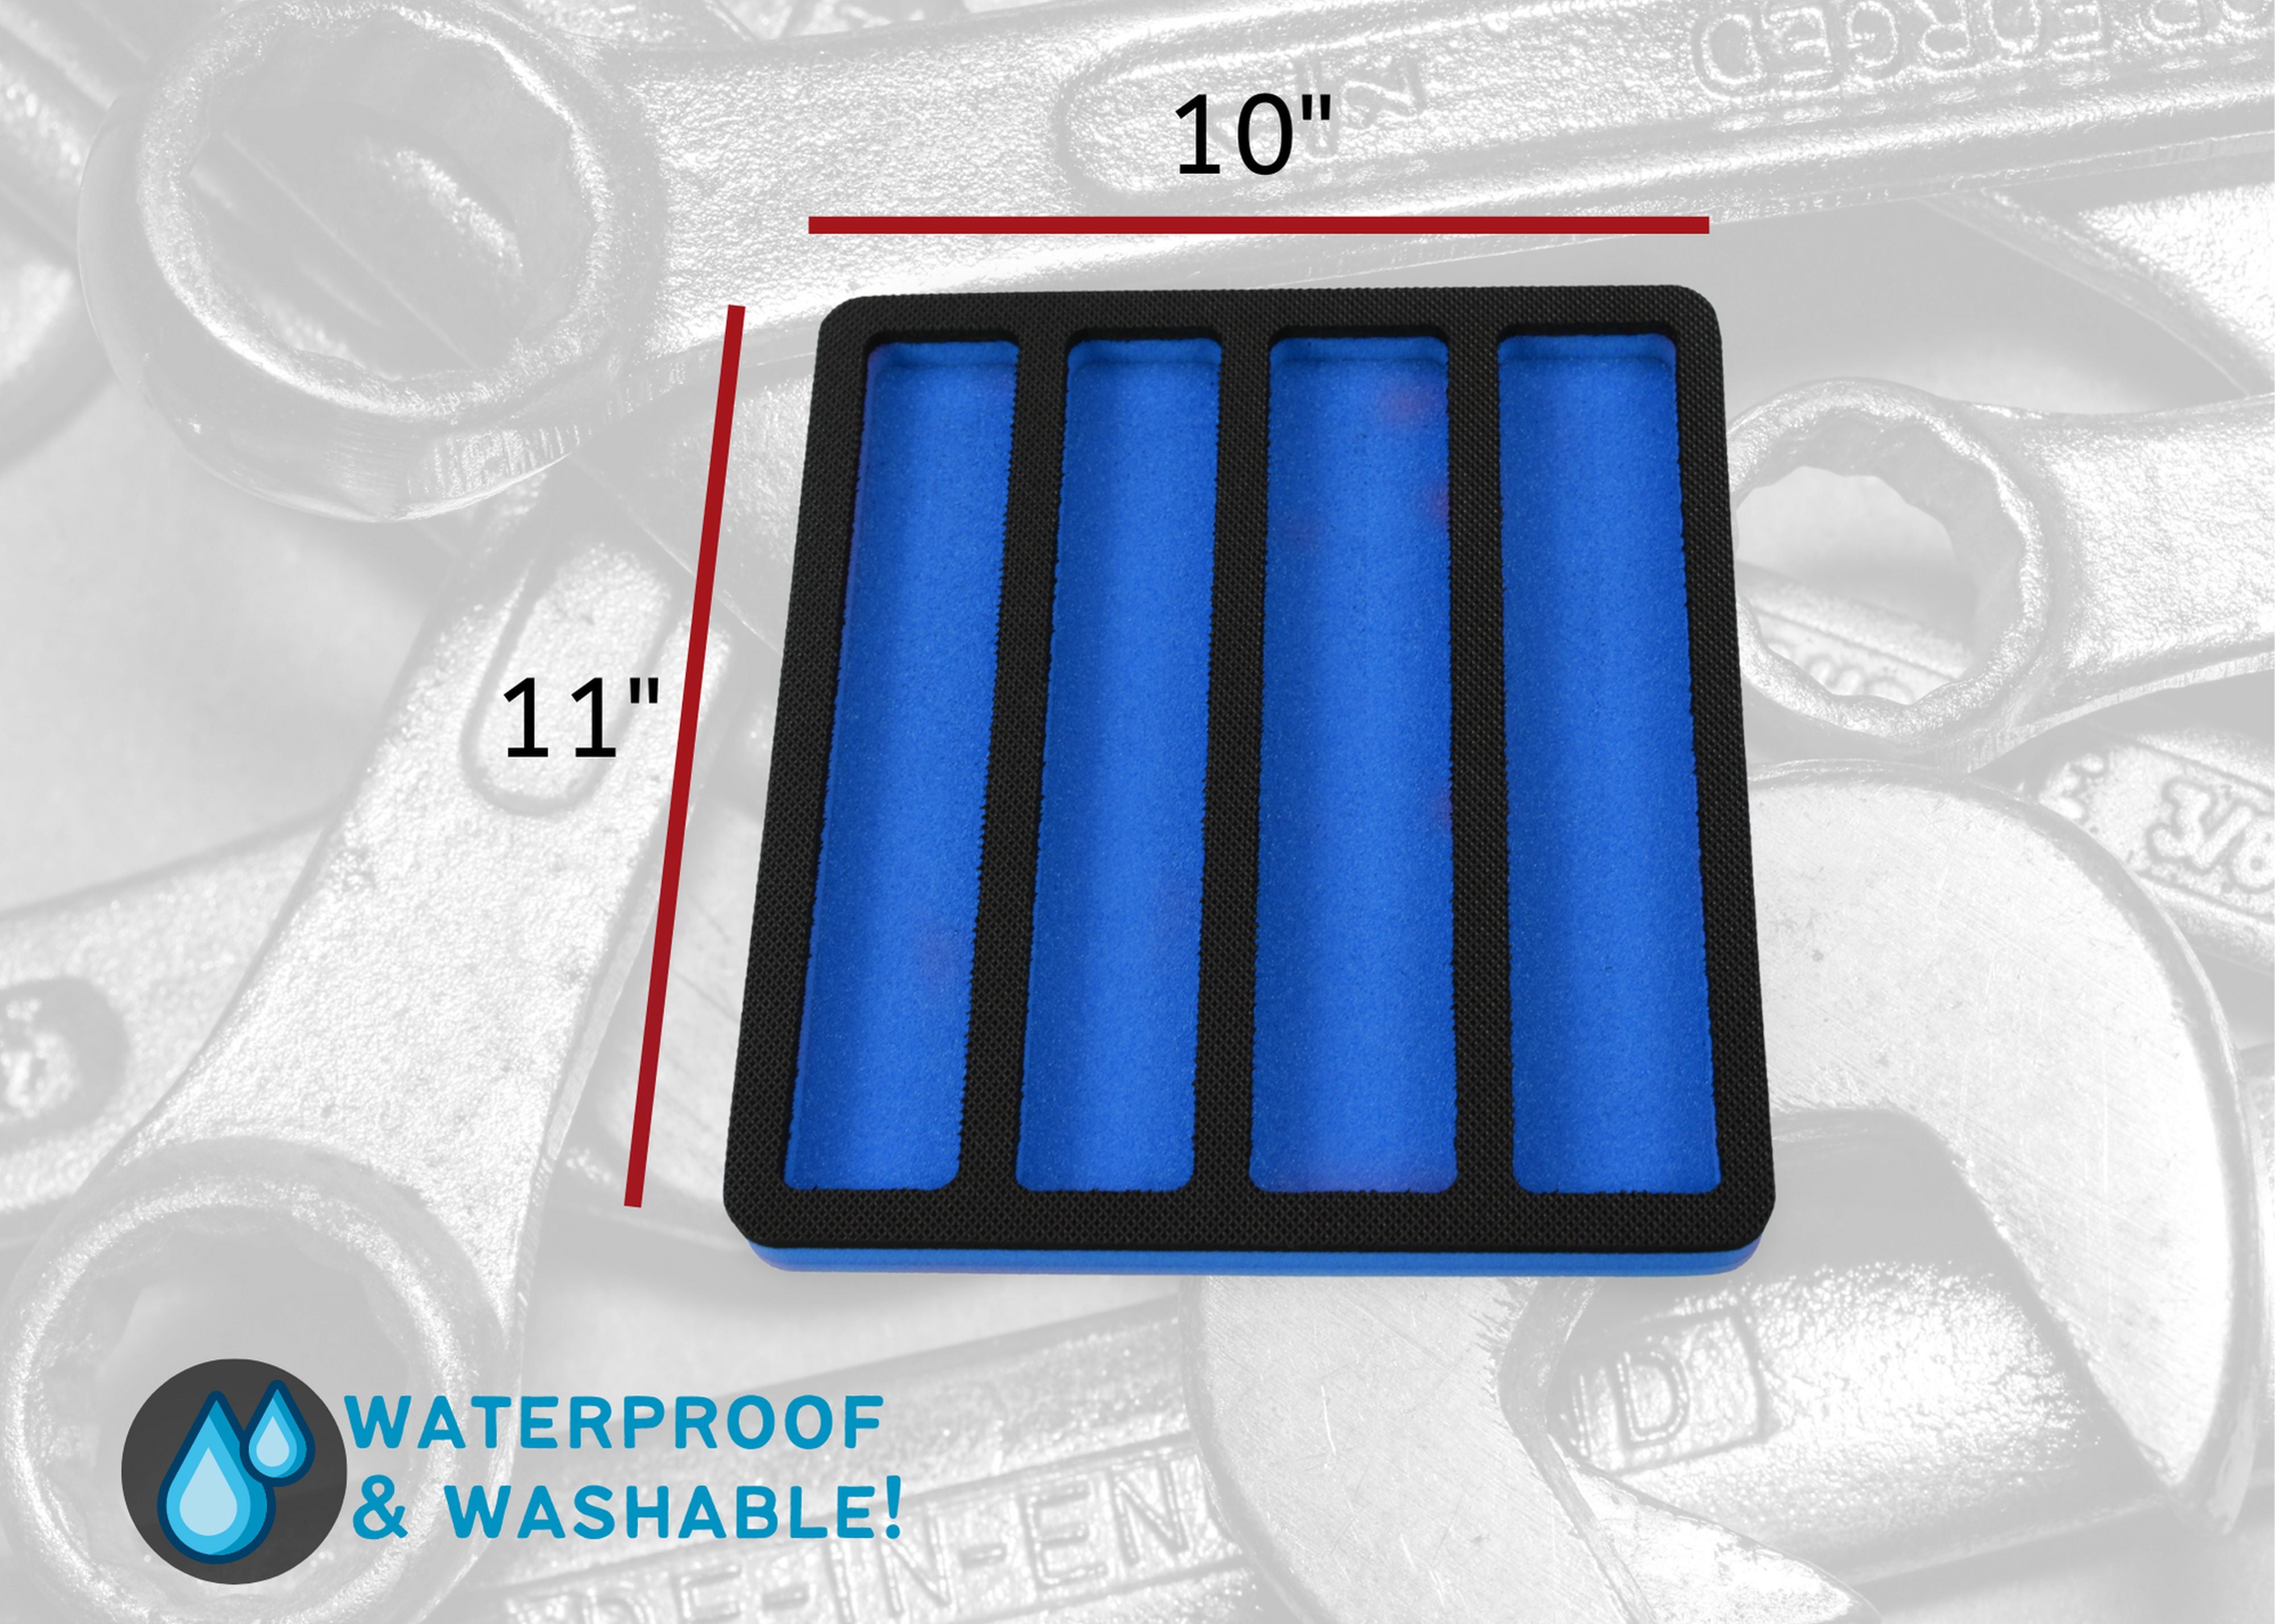 Tool Drawer Organizer Wrench Holder Insert Blue and Black Durable Foam Tray 4 Pockets Holds Wrenches Up To 10 Inches Long Fits Craftsman Husky Kobalt Milwaukee Many Others